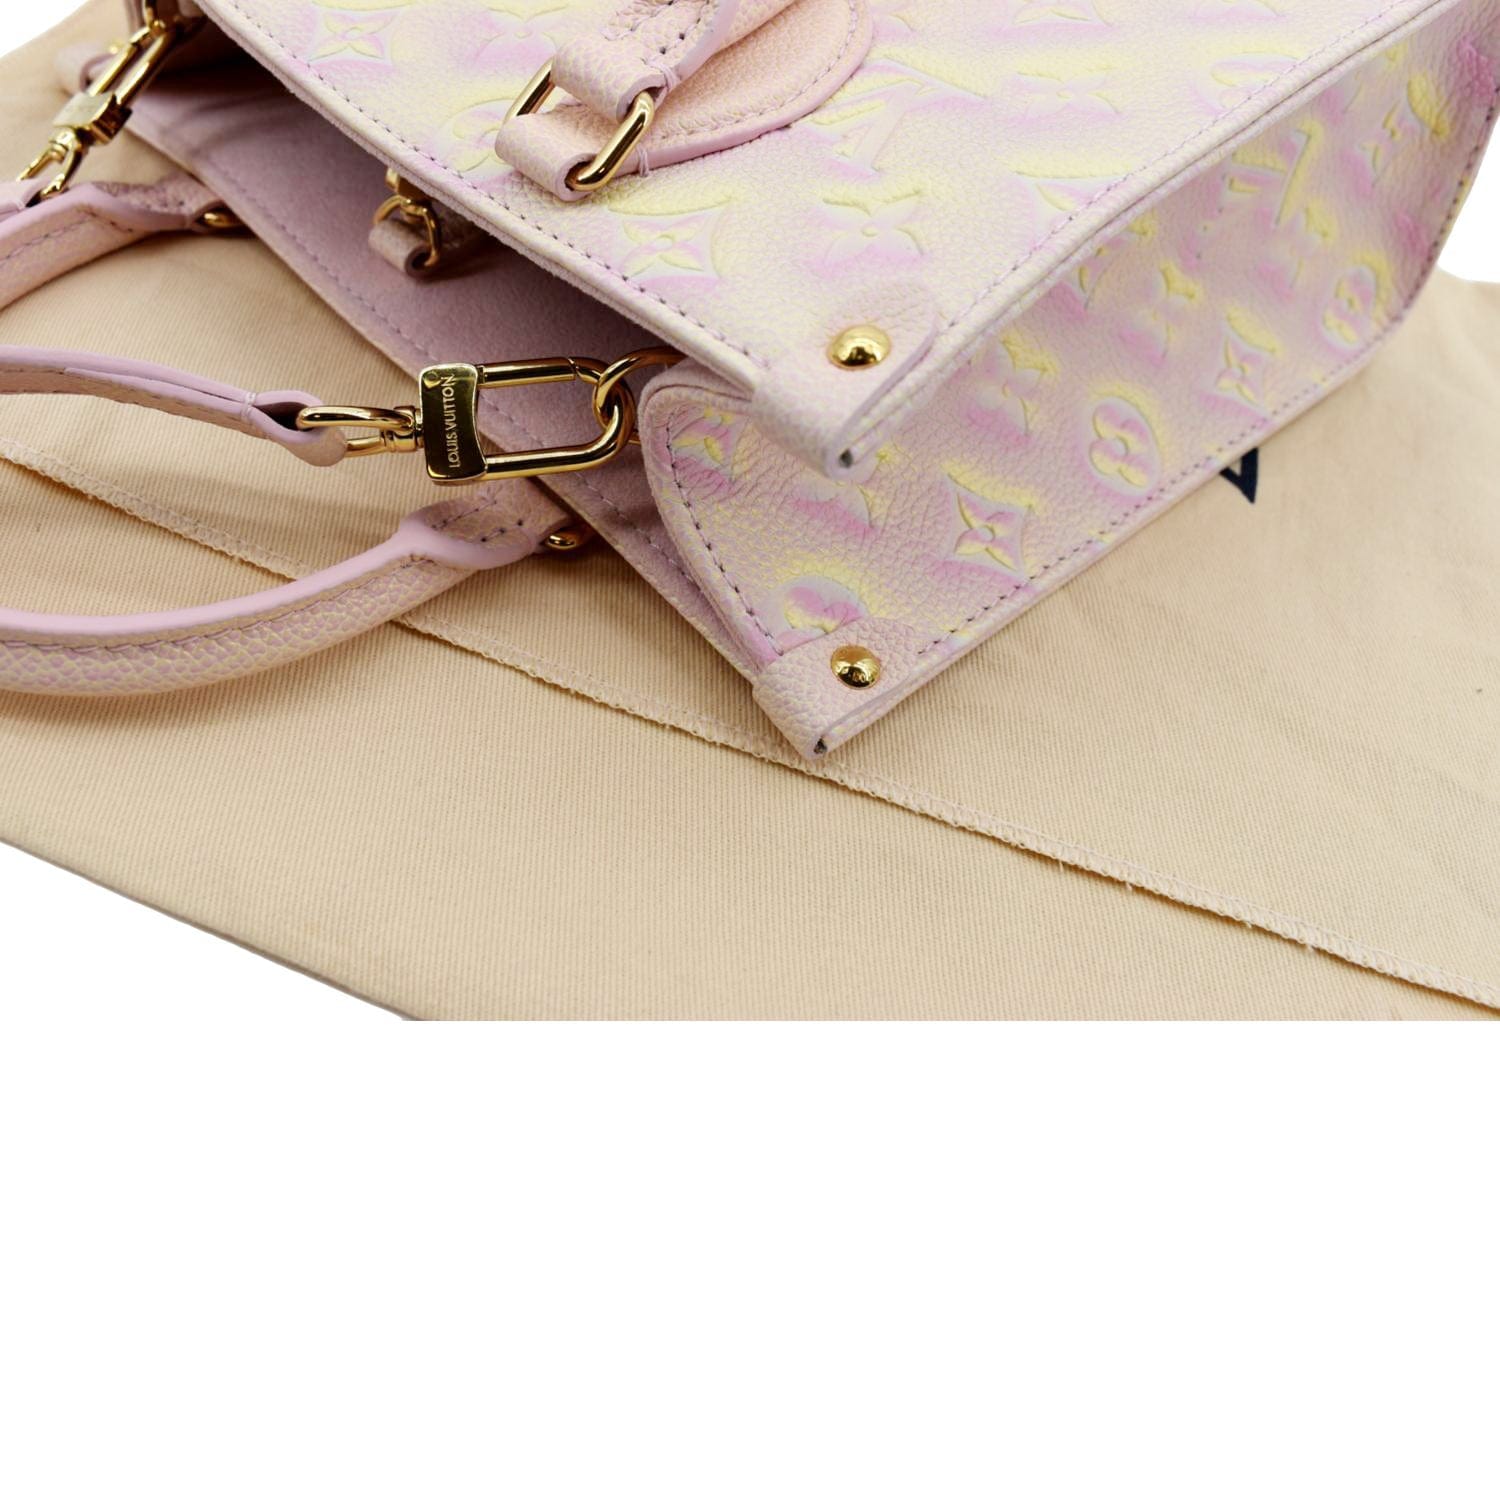 Louis Vuitton Onthego PM Stardust Lilas Bag